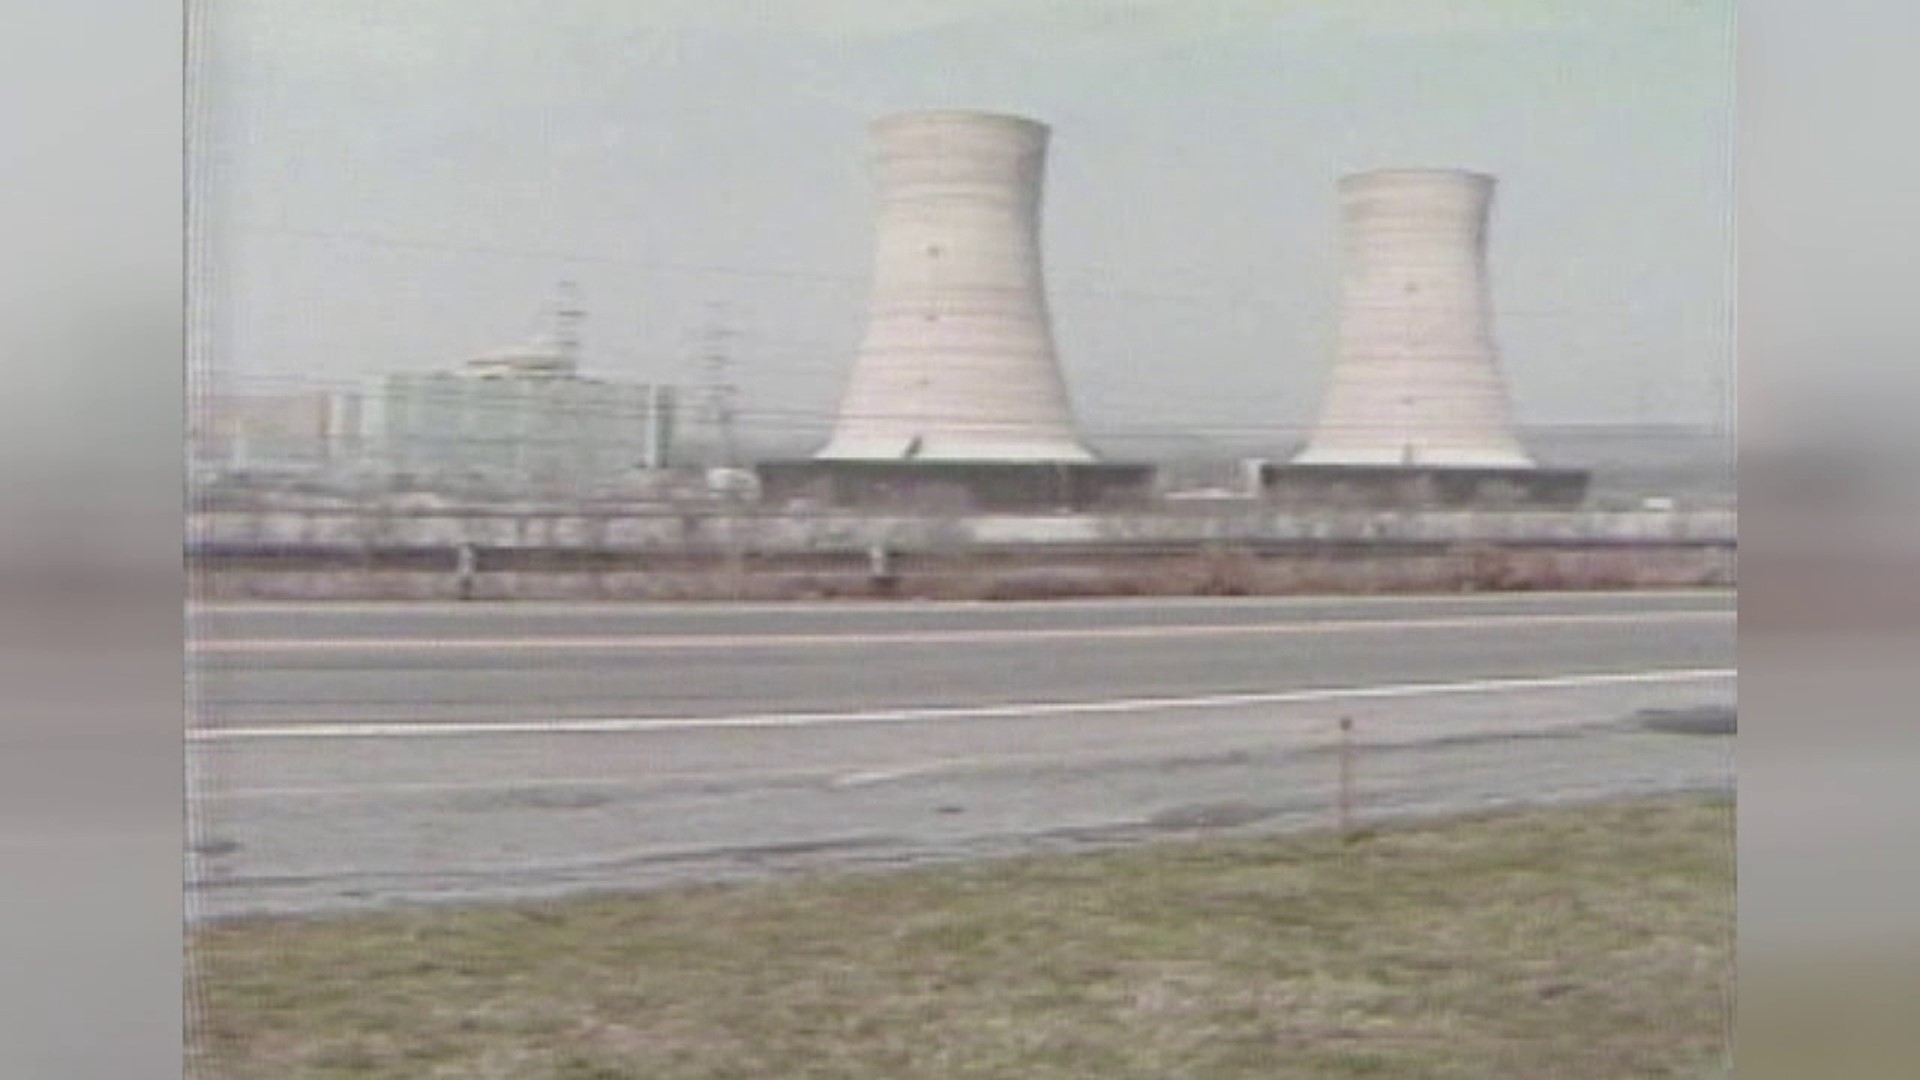 It's been 44 years since all eyes were on central Pennsylvania's Three Mile Island, the site of the nation's worst nuclear disaster.